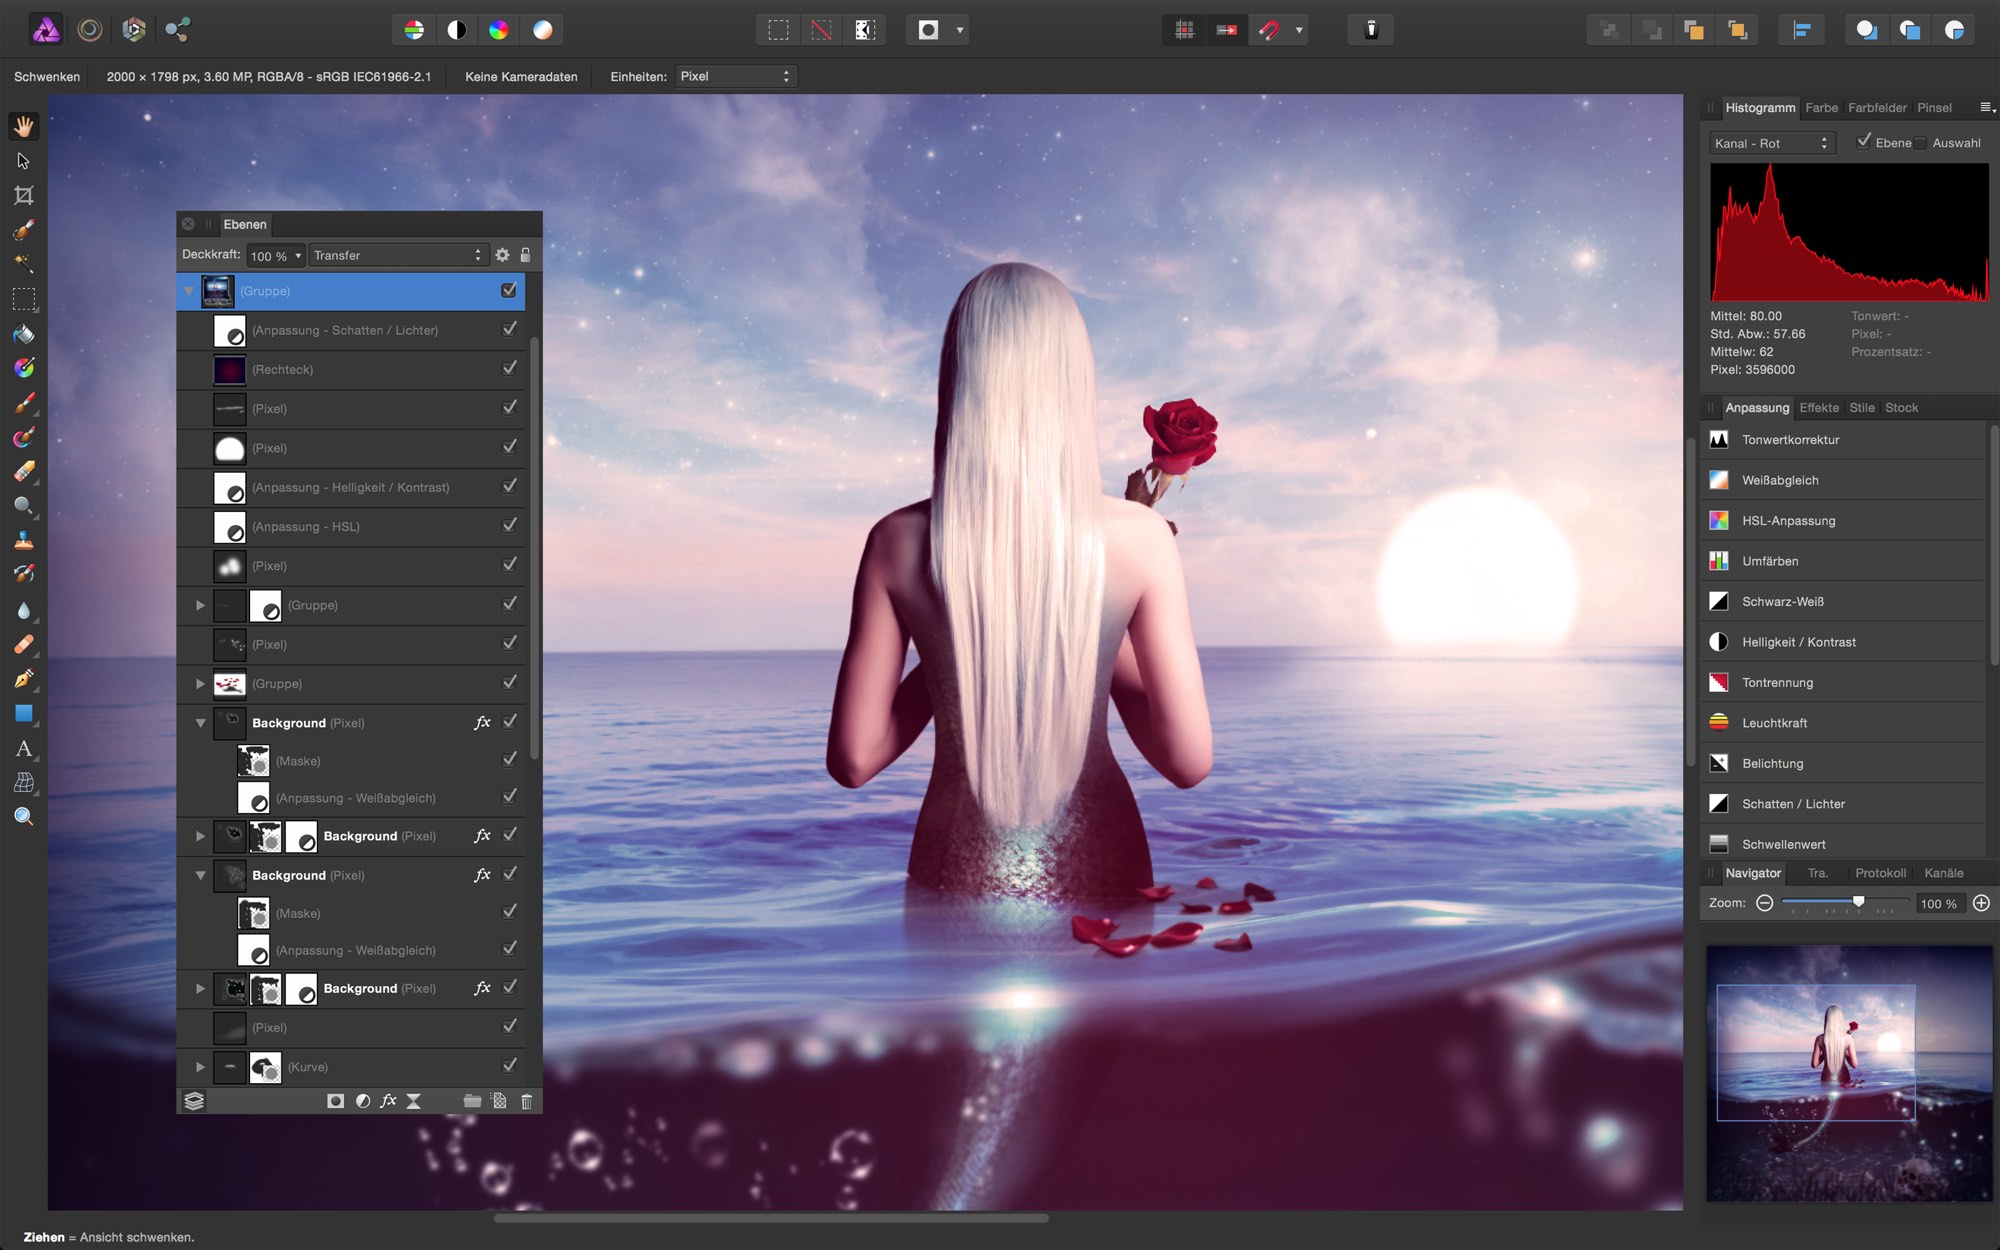 affinity photo Free download